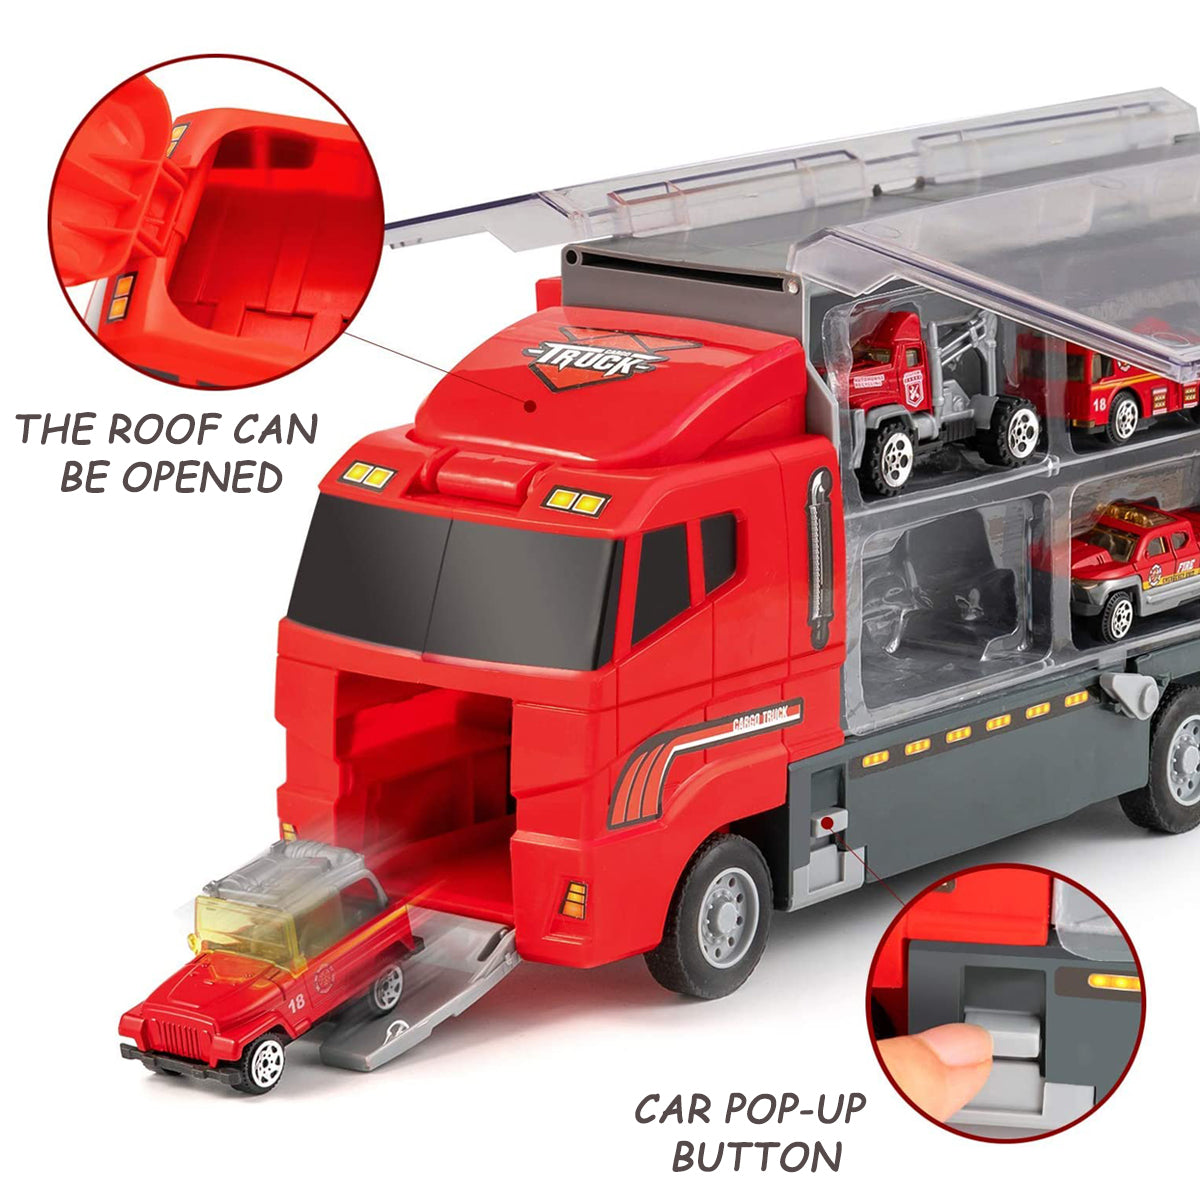 Joyfia 10 in 1 Fire Truck Toys, Mini Die-cast Fire Engine Car Toy Set in Carrier Truck, Rescue Emergency Double Side Transport Vehicle for 3 Years Old Boys and Girls